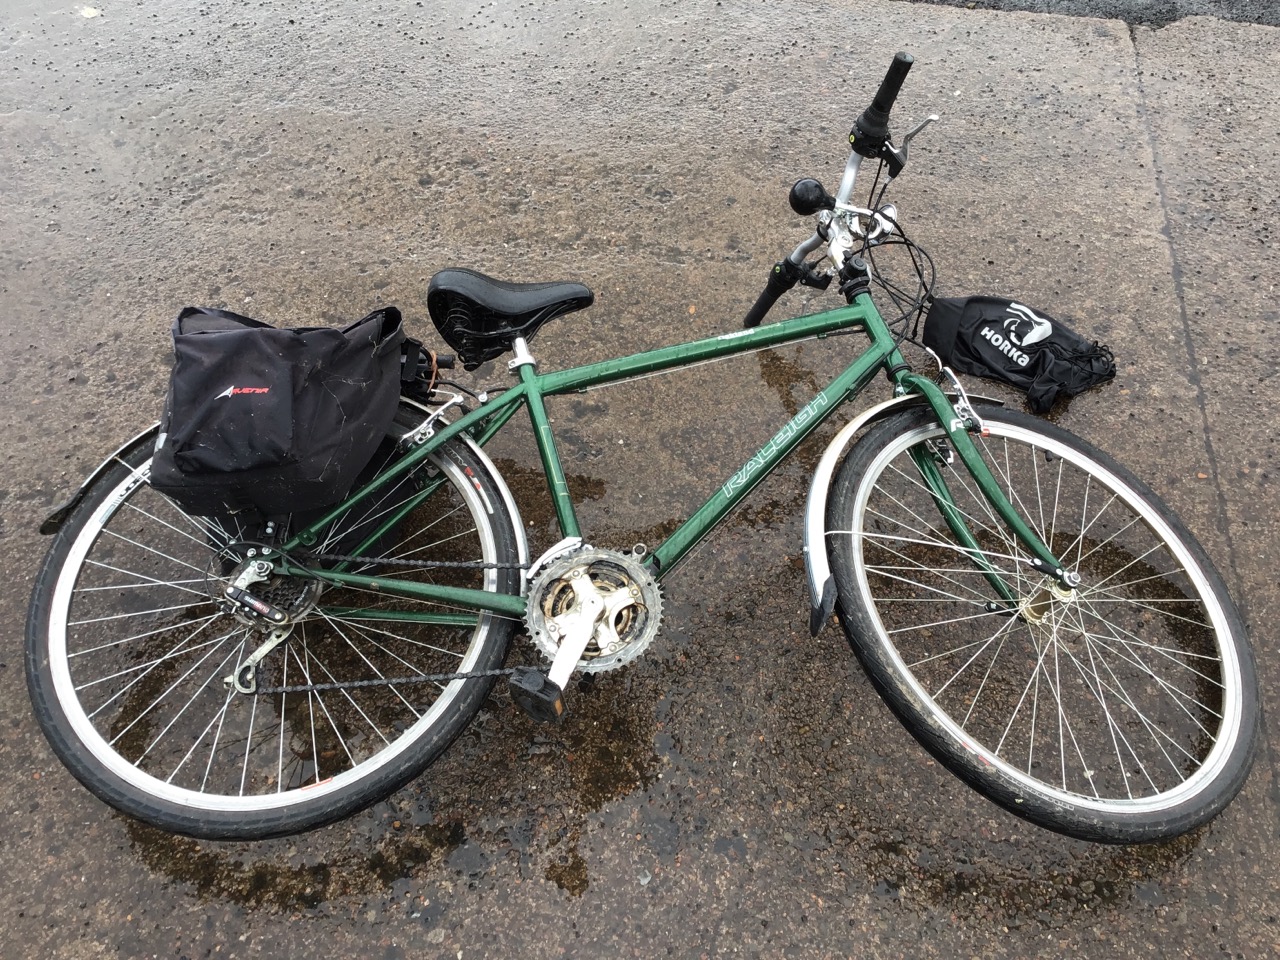 A Raleigh Oakland bicycle, with flat riser handlebars, Shimano gears, padded saddle, two helmets, - Image 2 of 3